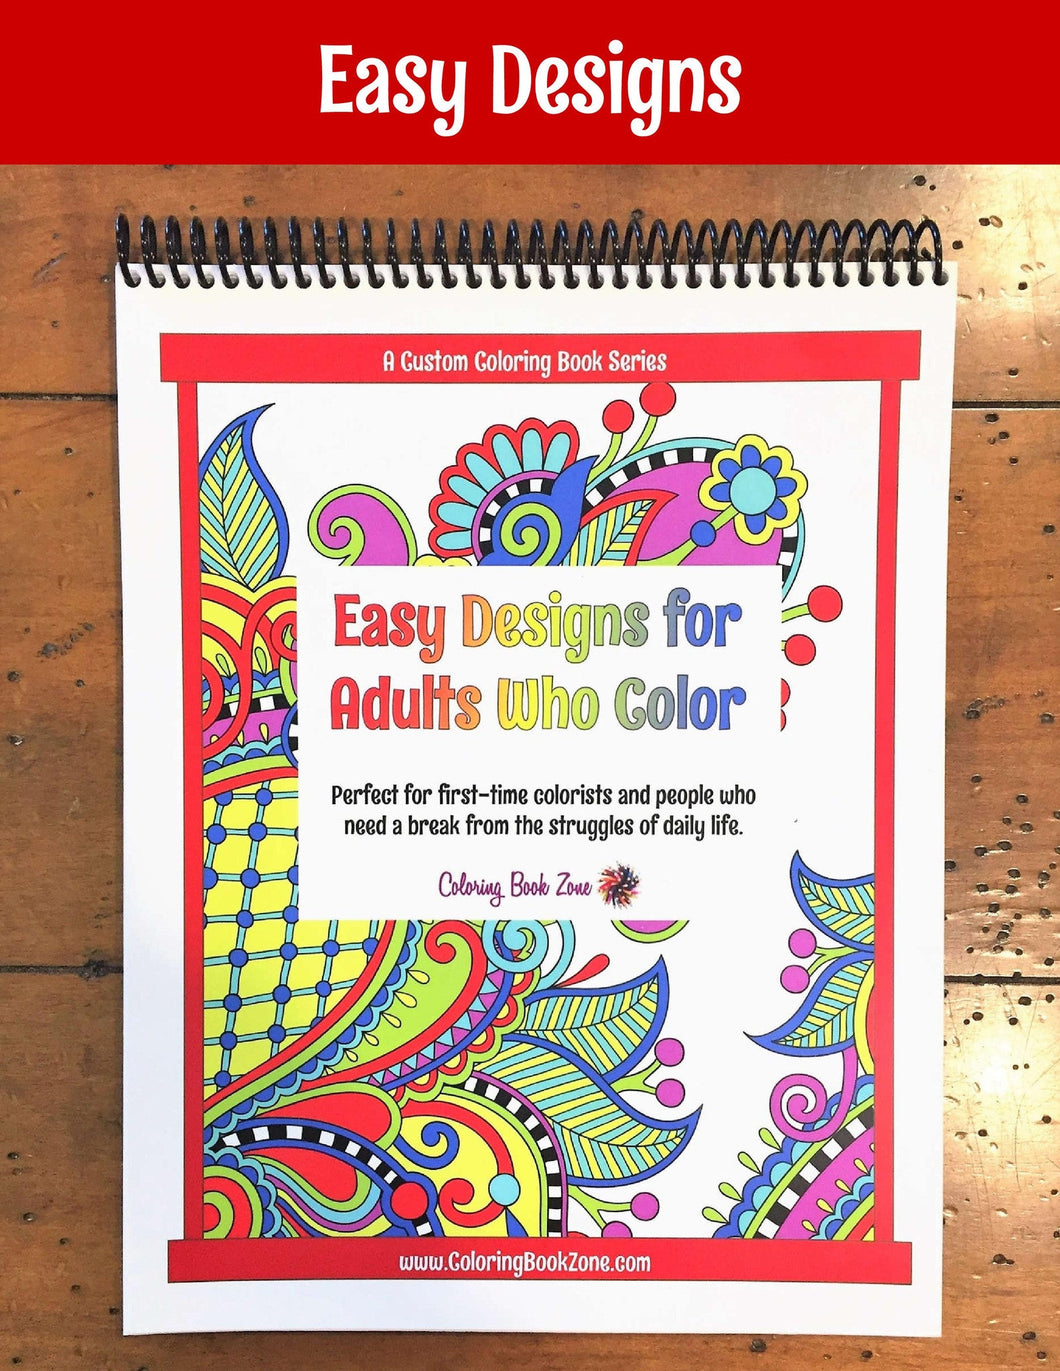 Easy Designs for Adults Who Color - Live Your Life in Color Series